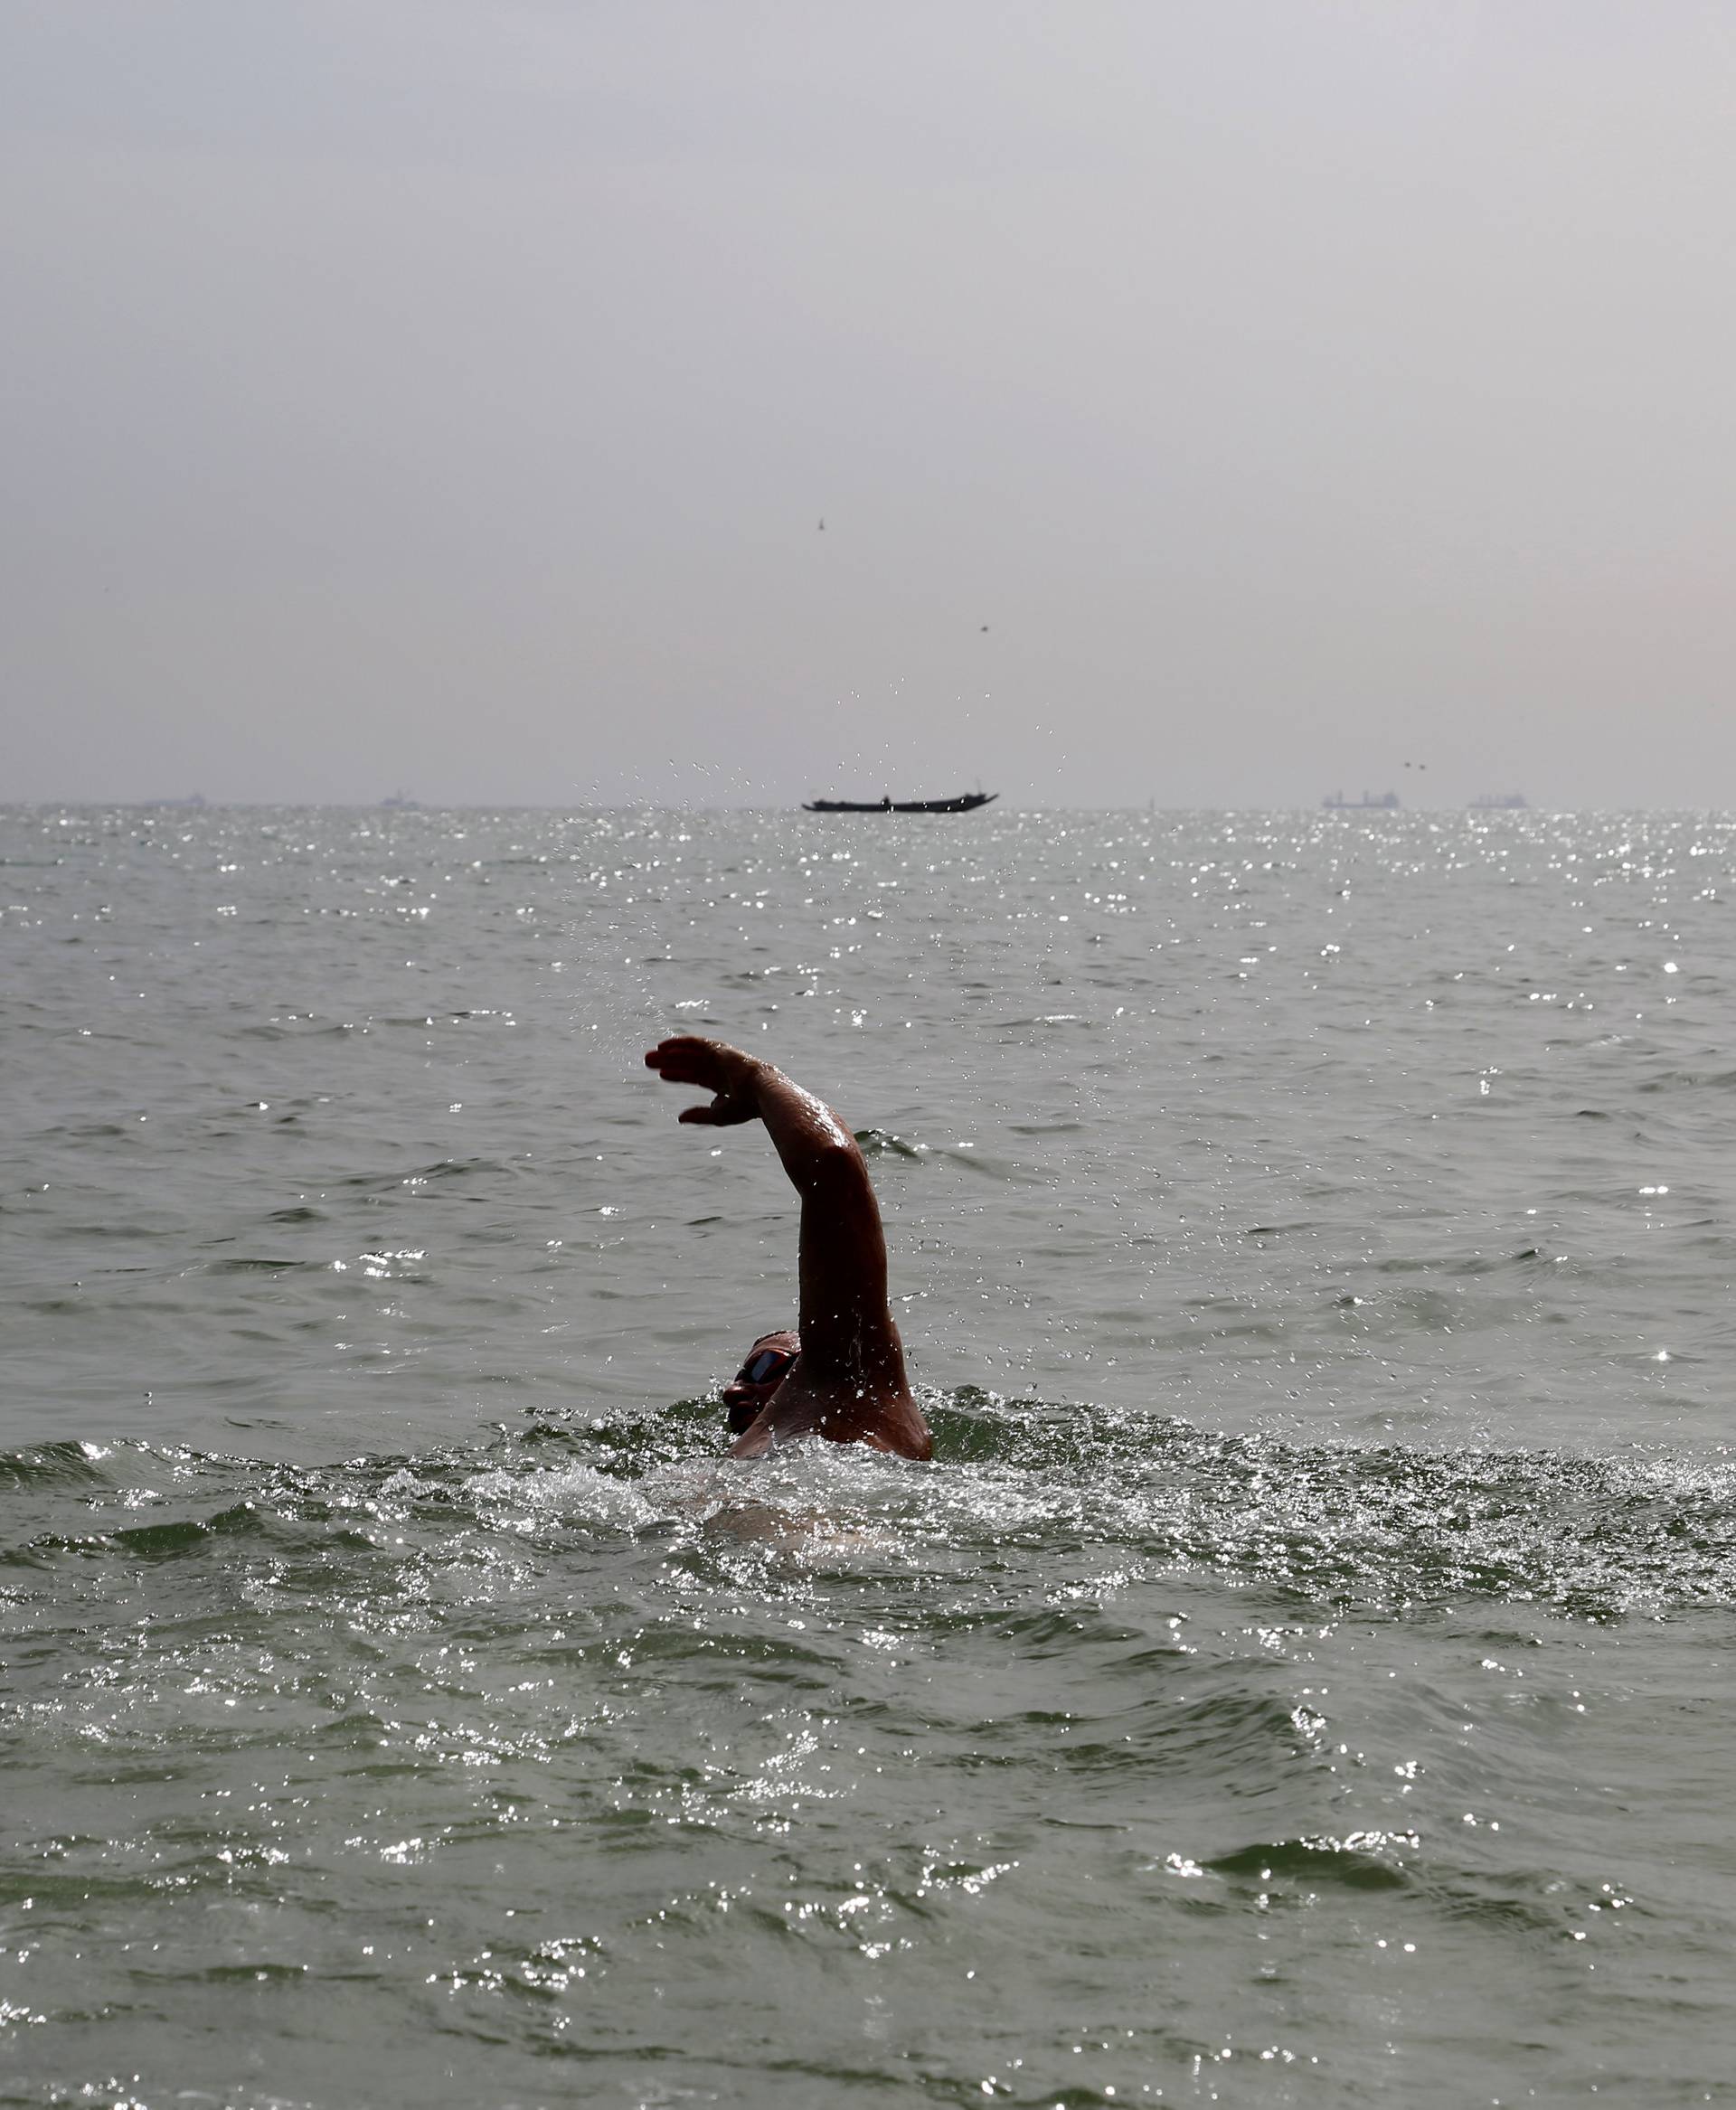 Ben Hooper prepares to begin an expedition to become the first swimmer to make a verified crossing of the Atlantic Ocean in Dakar